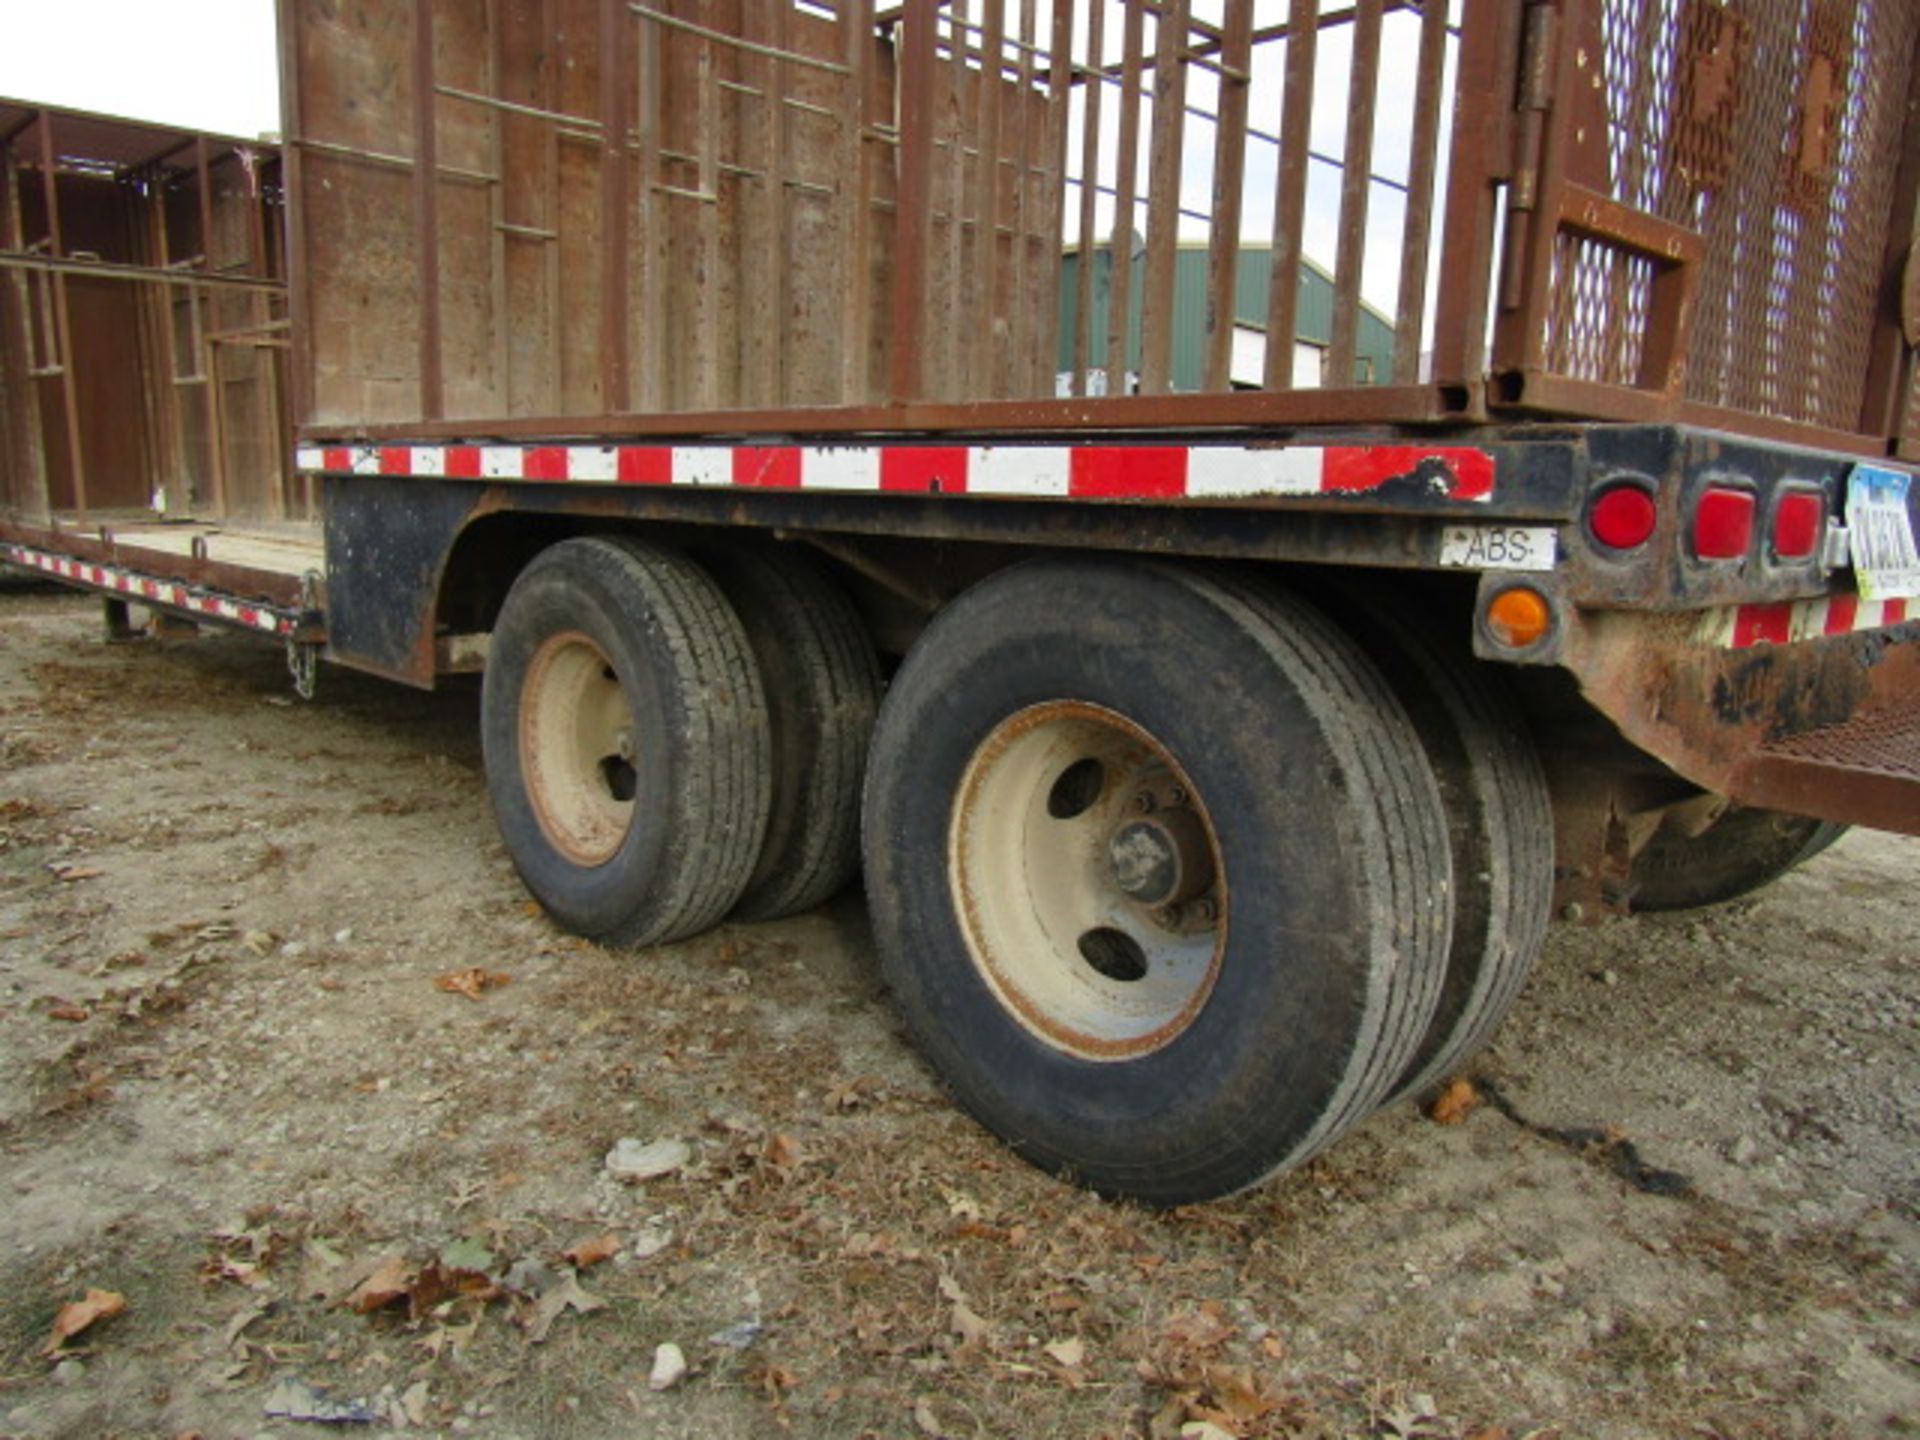 2004 B-B Gooseneck Trailer, Tandem Axle, 18' 8" x 9' 6" Well, 8' 7" Top Deck, Located in - Image 6 of 9